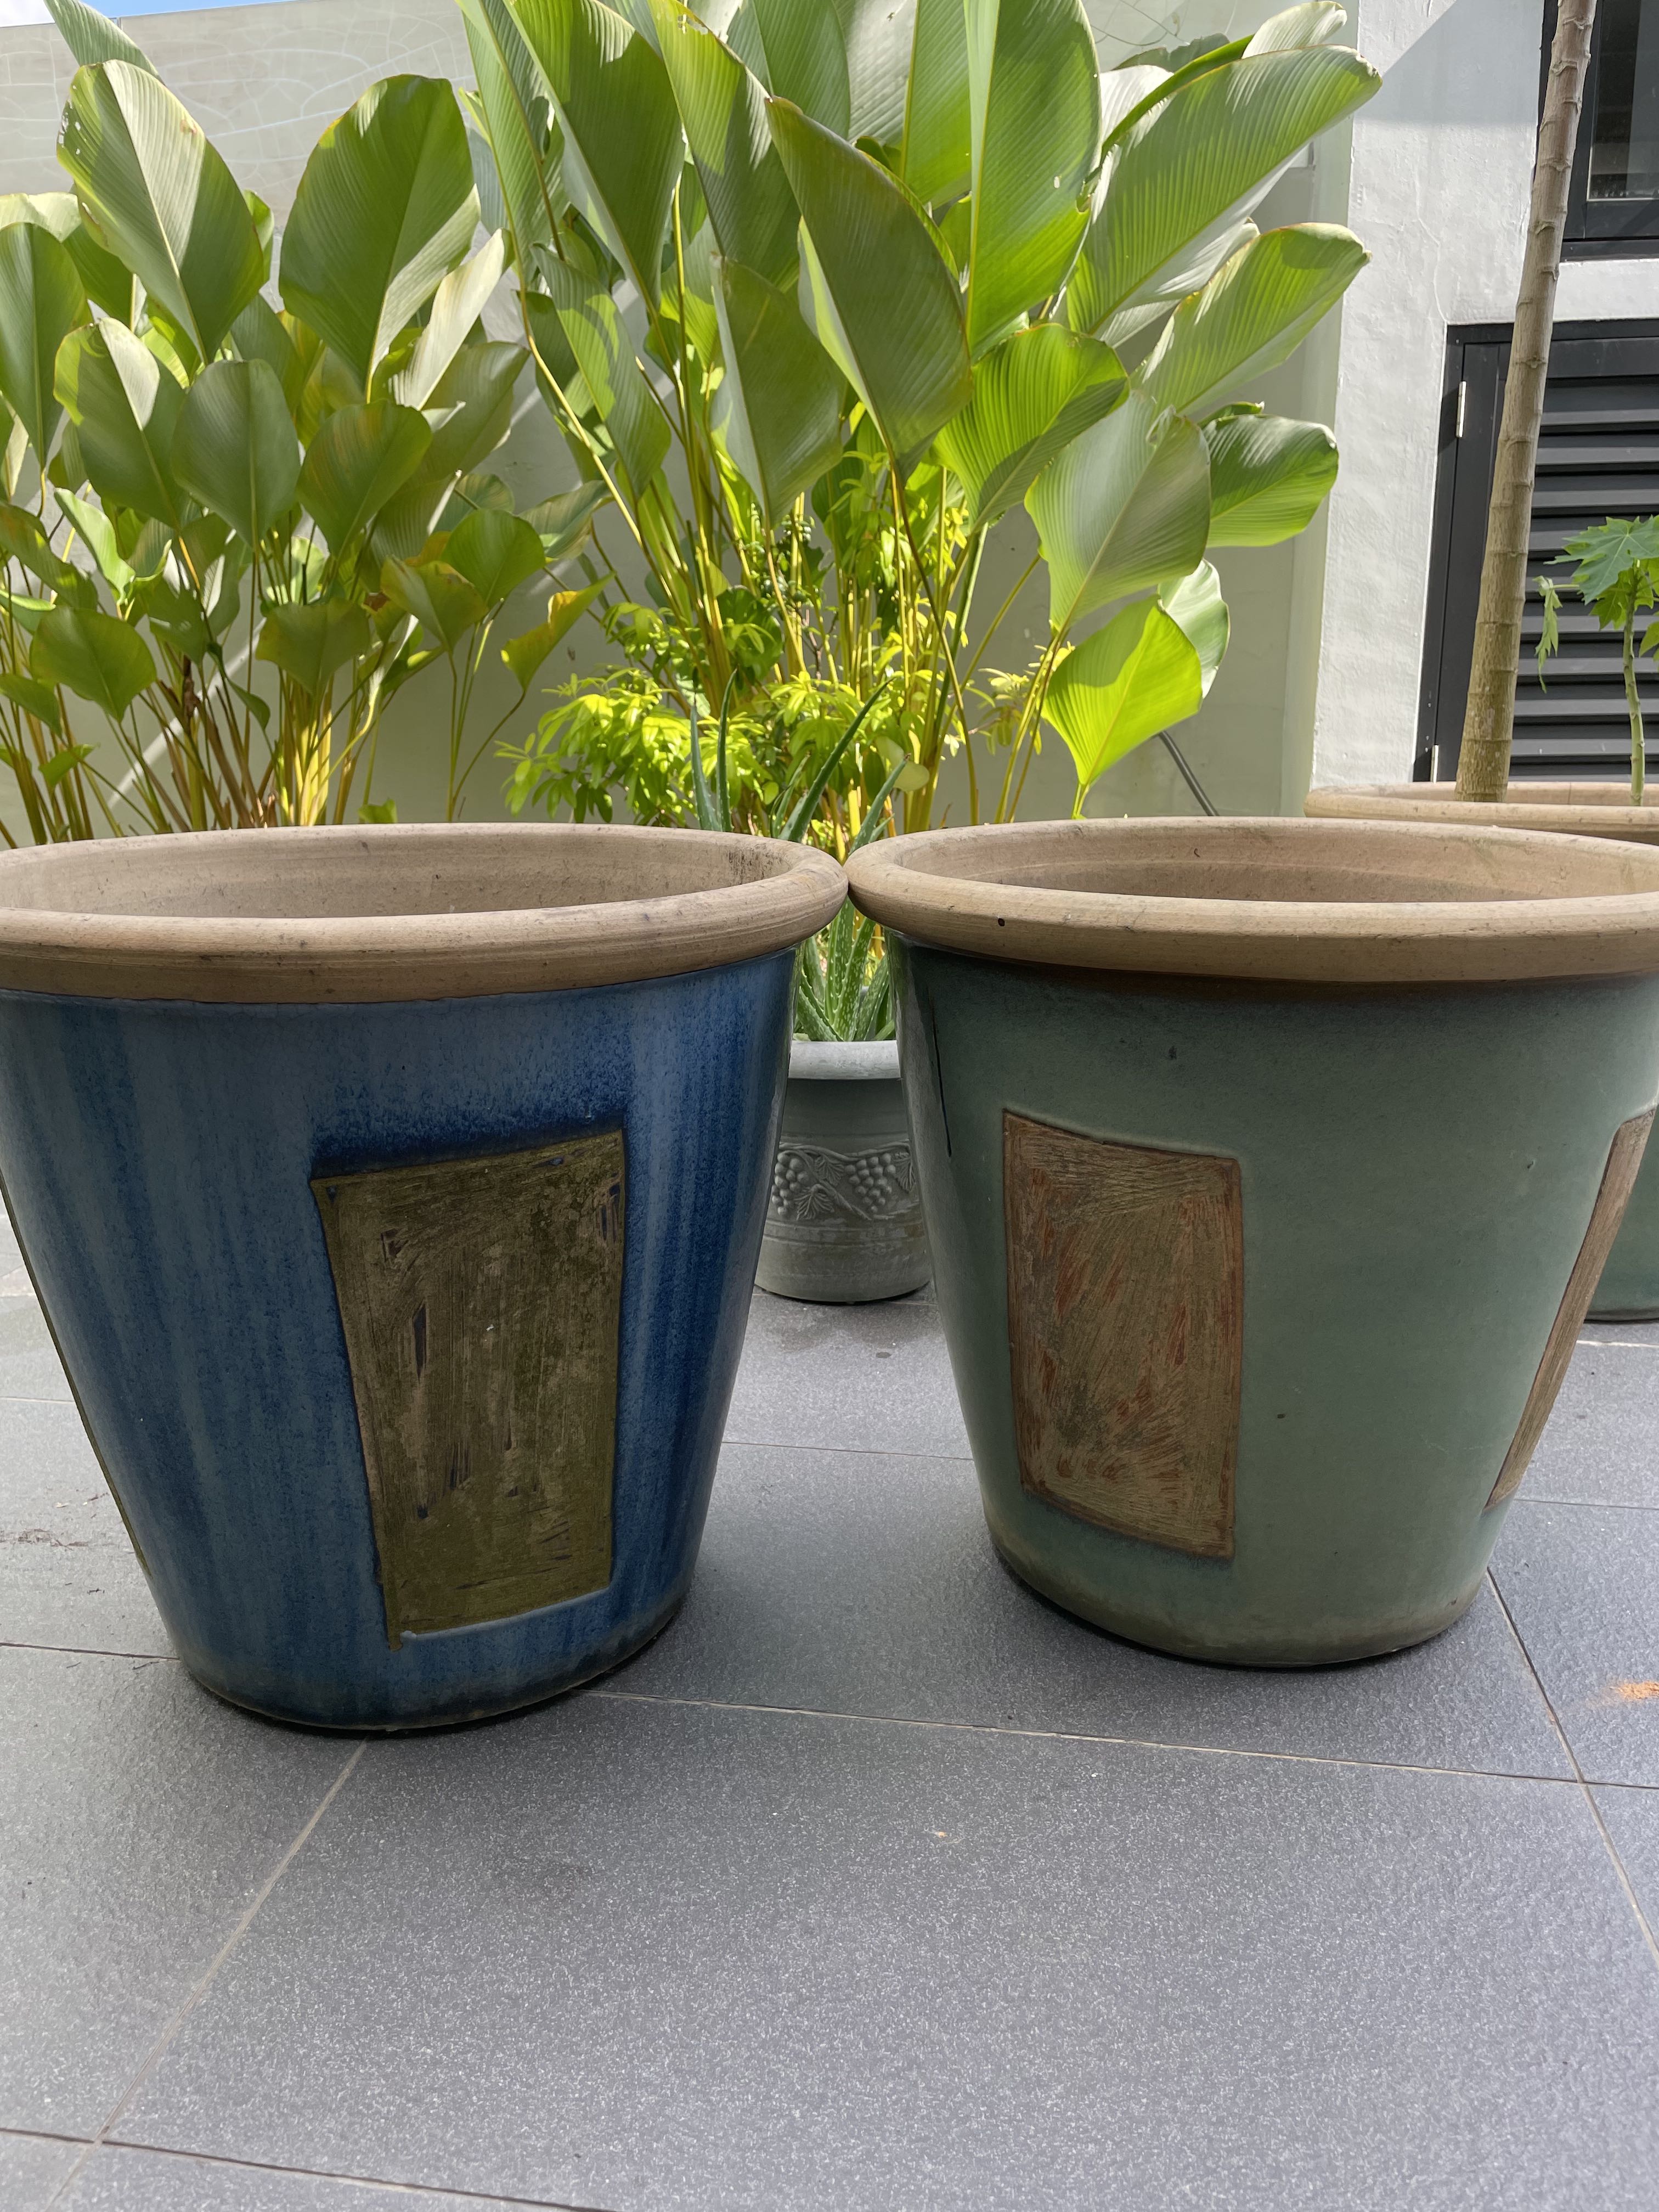 Preown Flower Pots for sale, Furniture & Home Living, Gardening